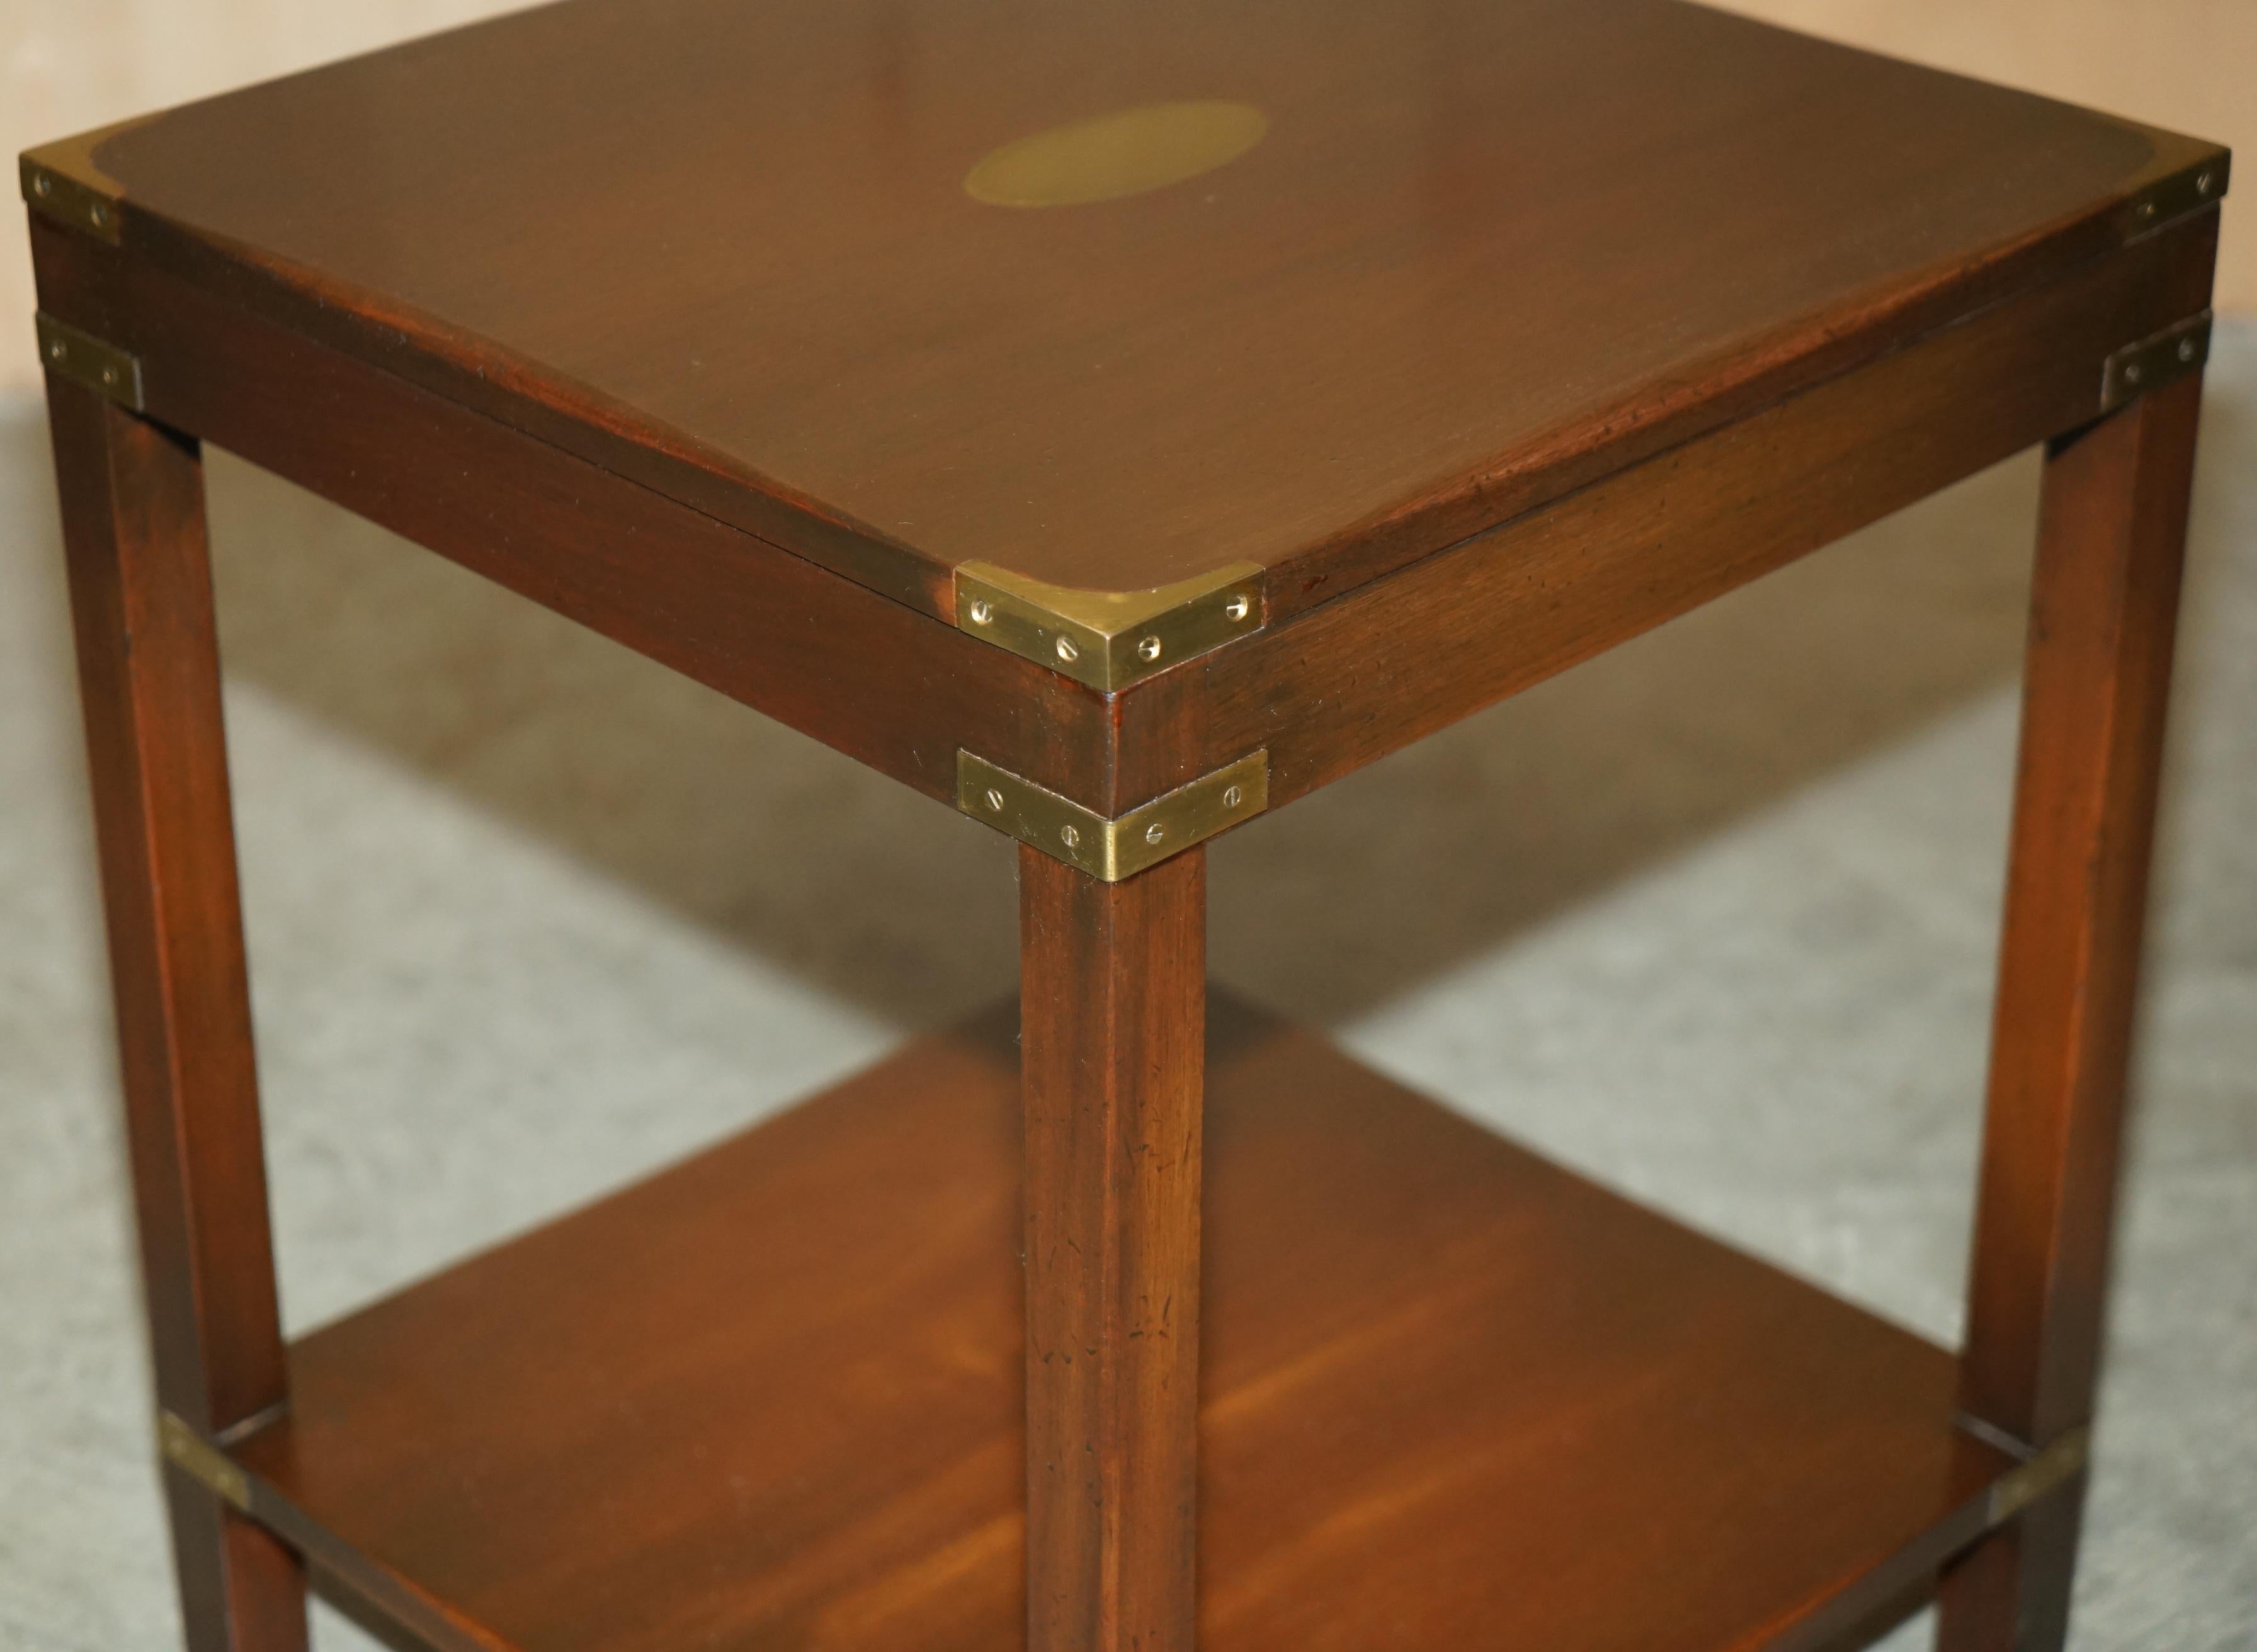 LUXURY HARRODS LONDON KENNEDY MILITARY CAMPAIGN HiGH SIDE END TABLE HARDWOOD For Sale 3